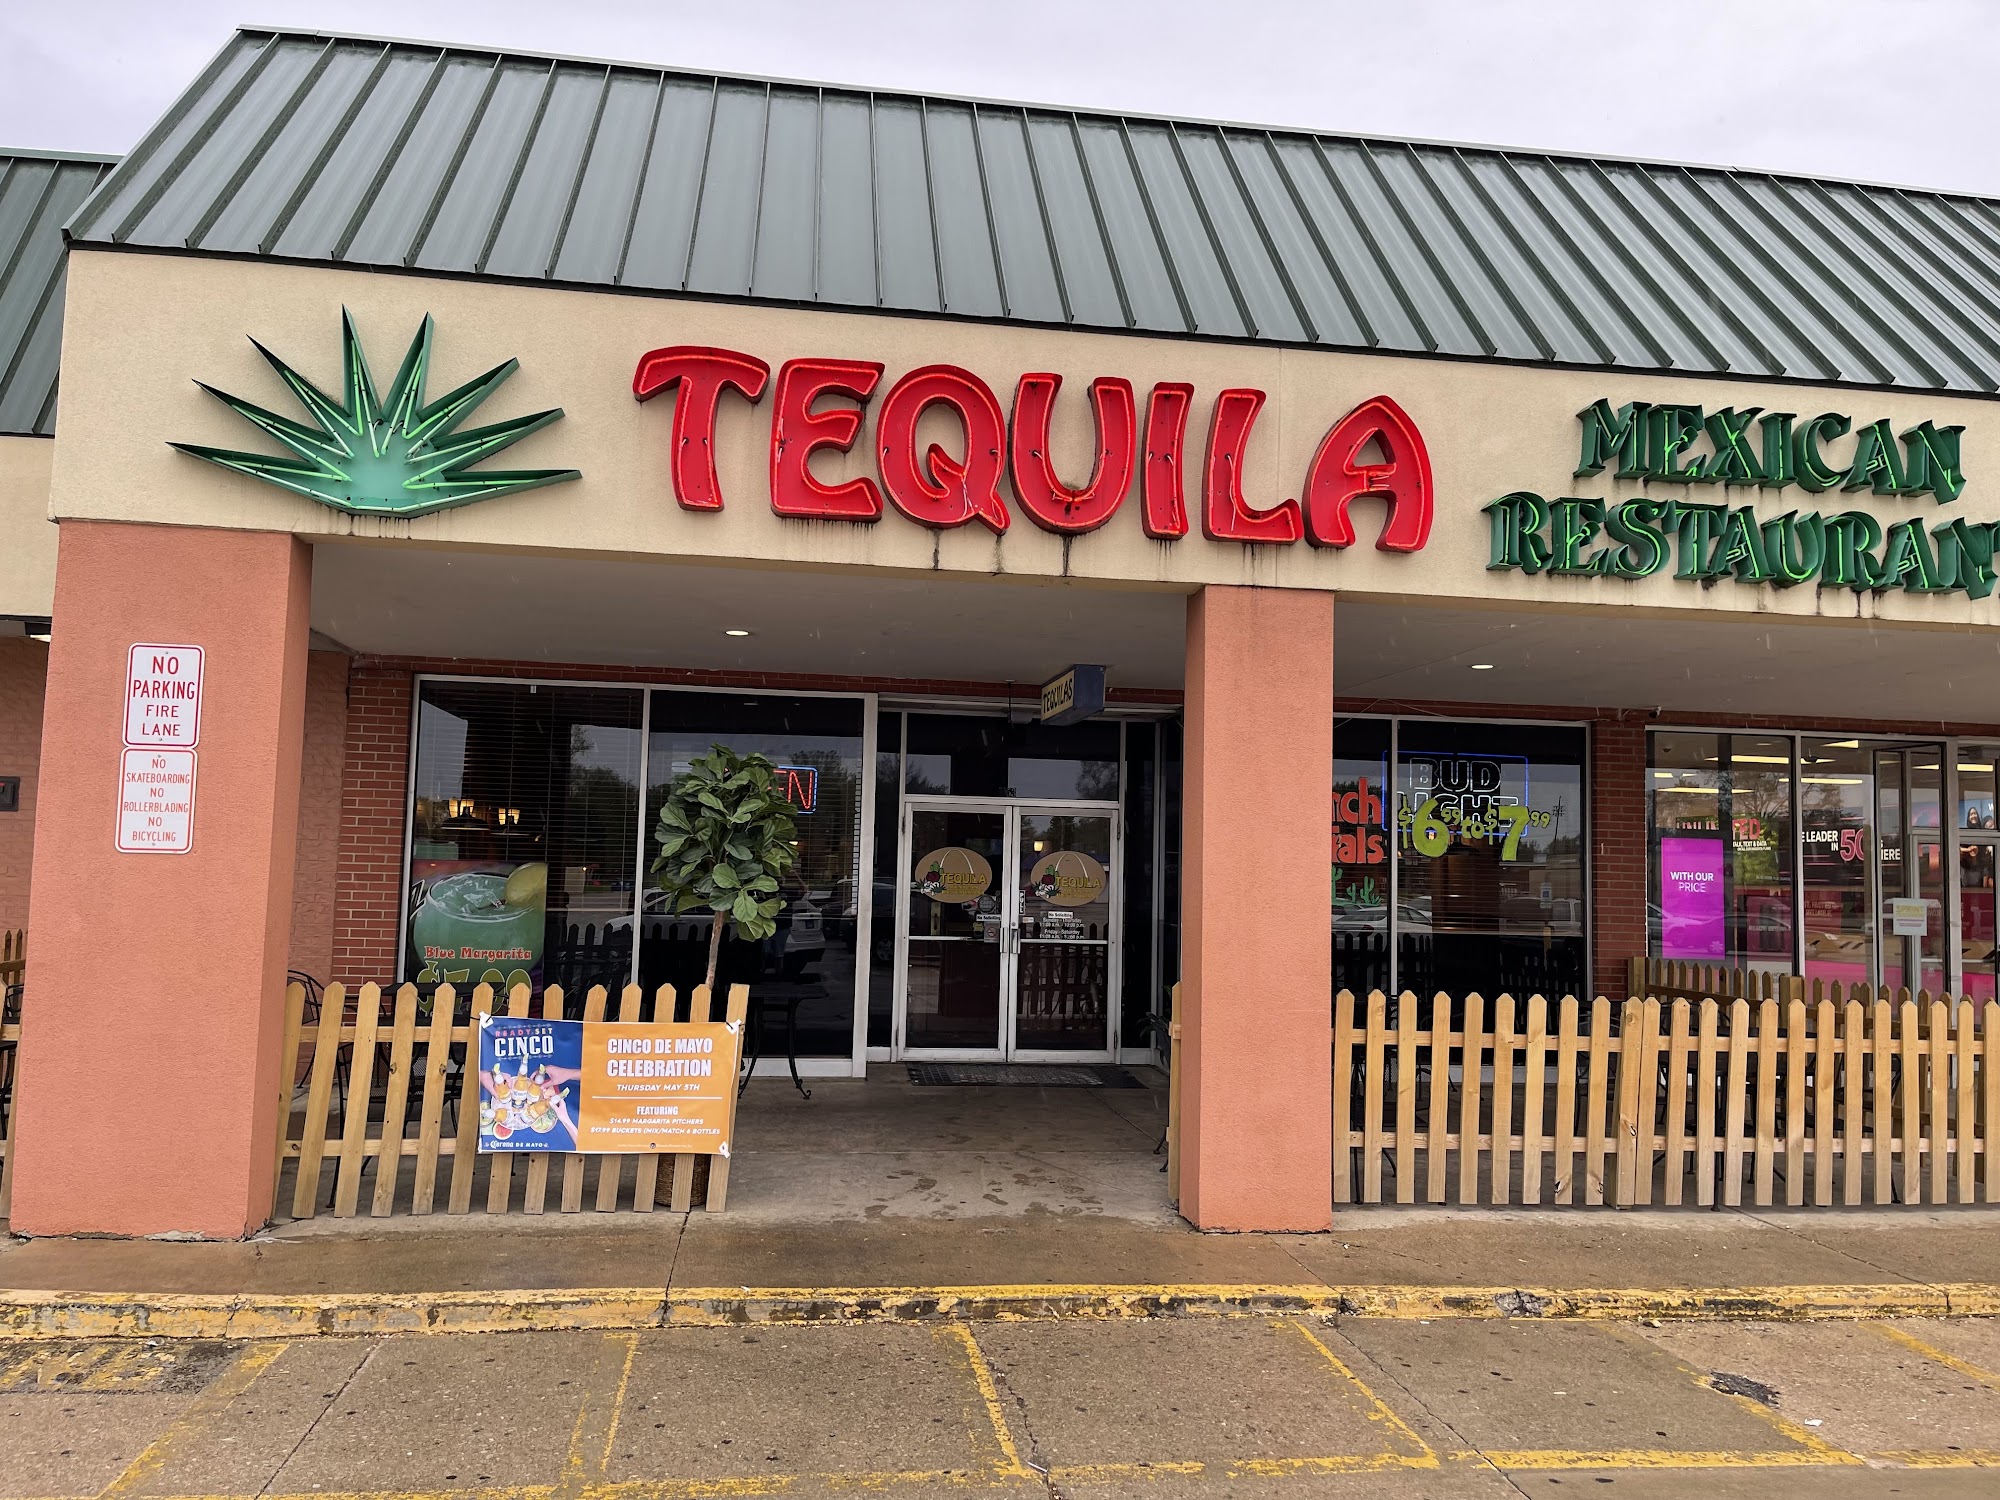 Tequila Mexican Restaurant - West side